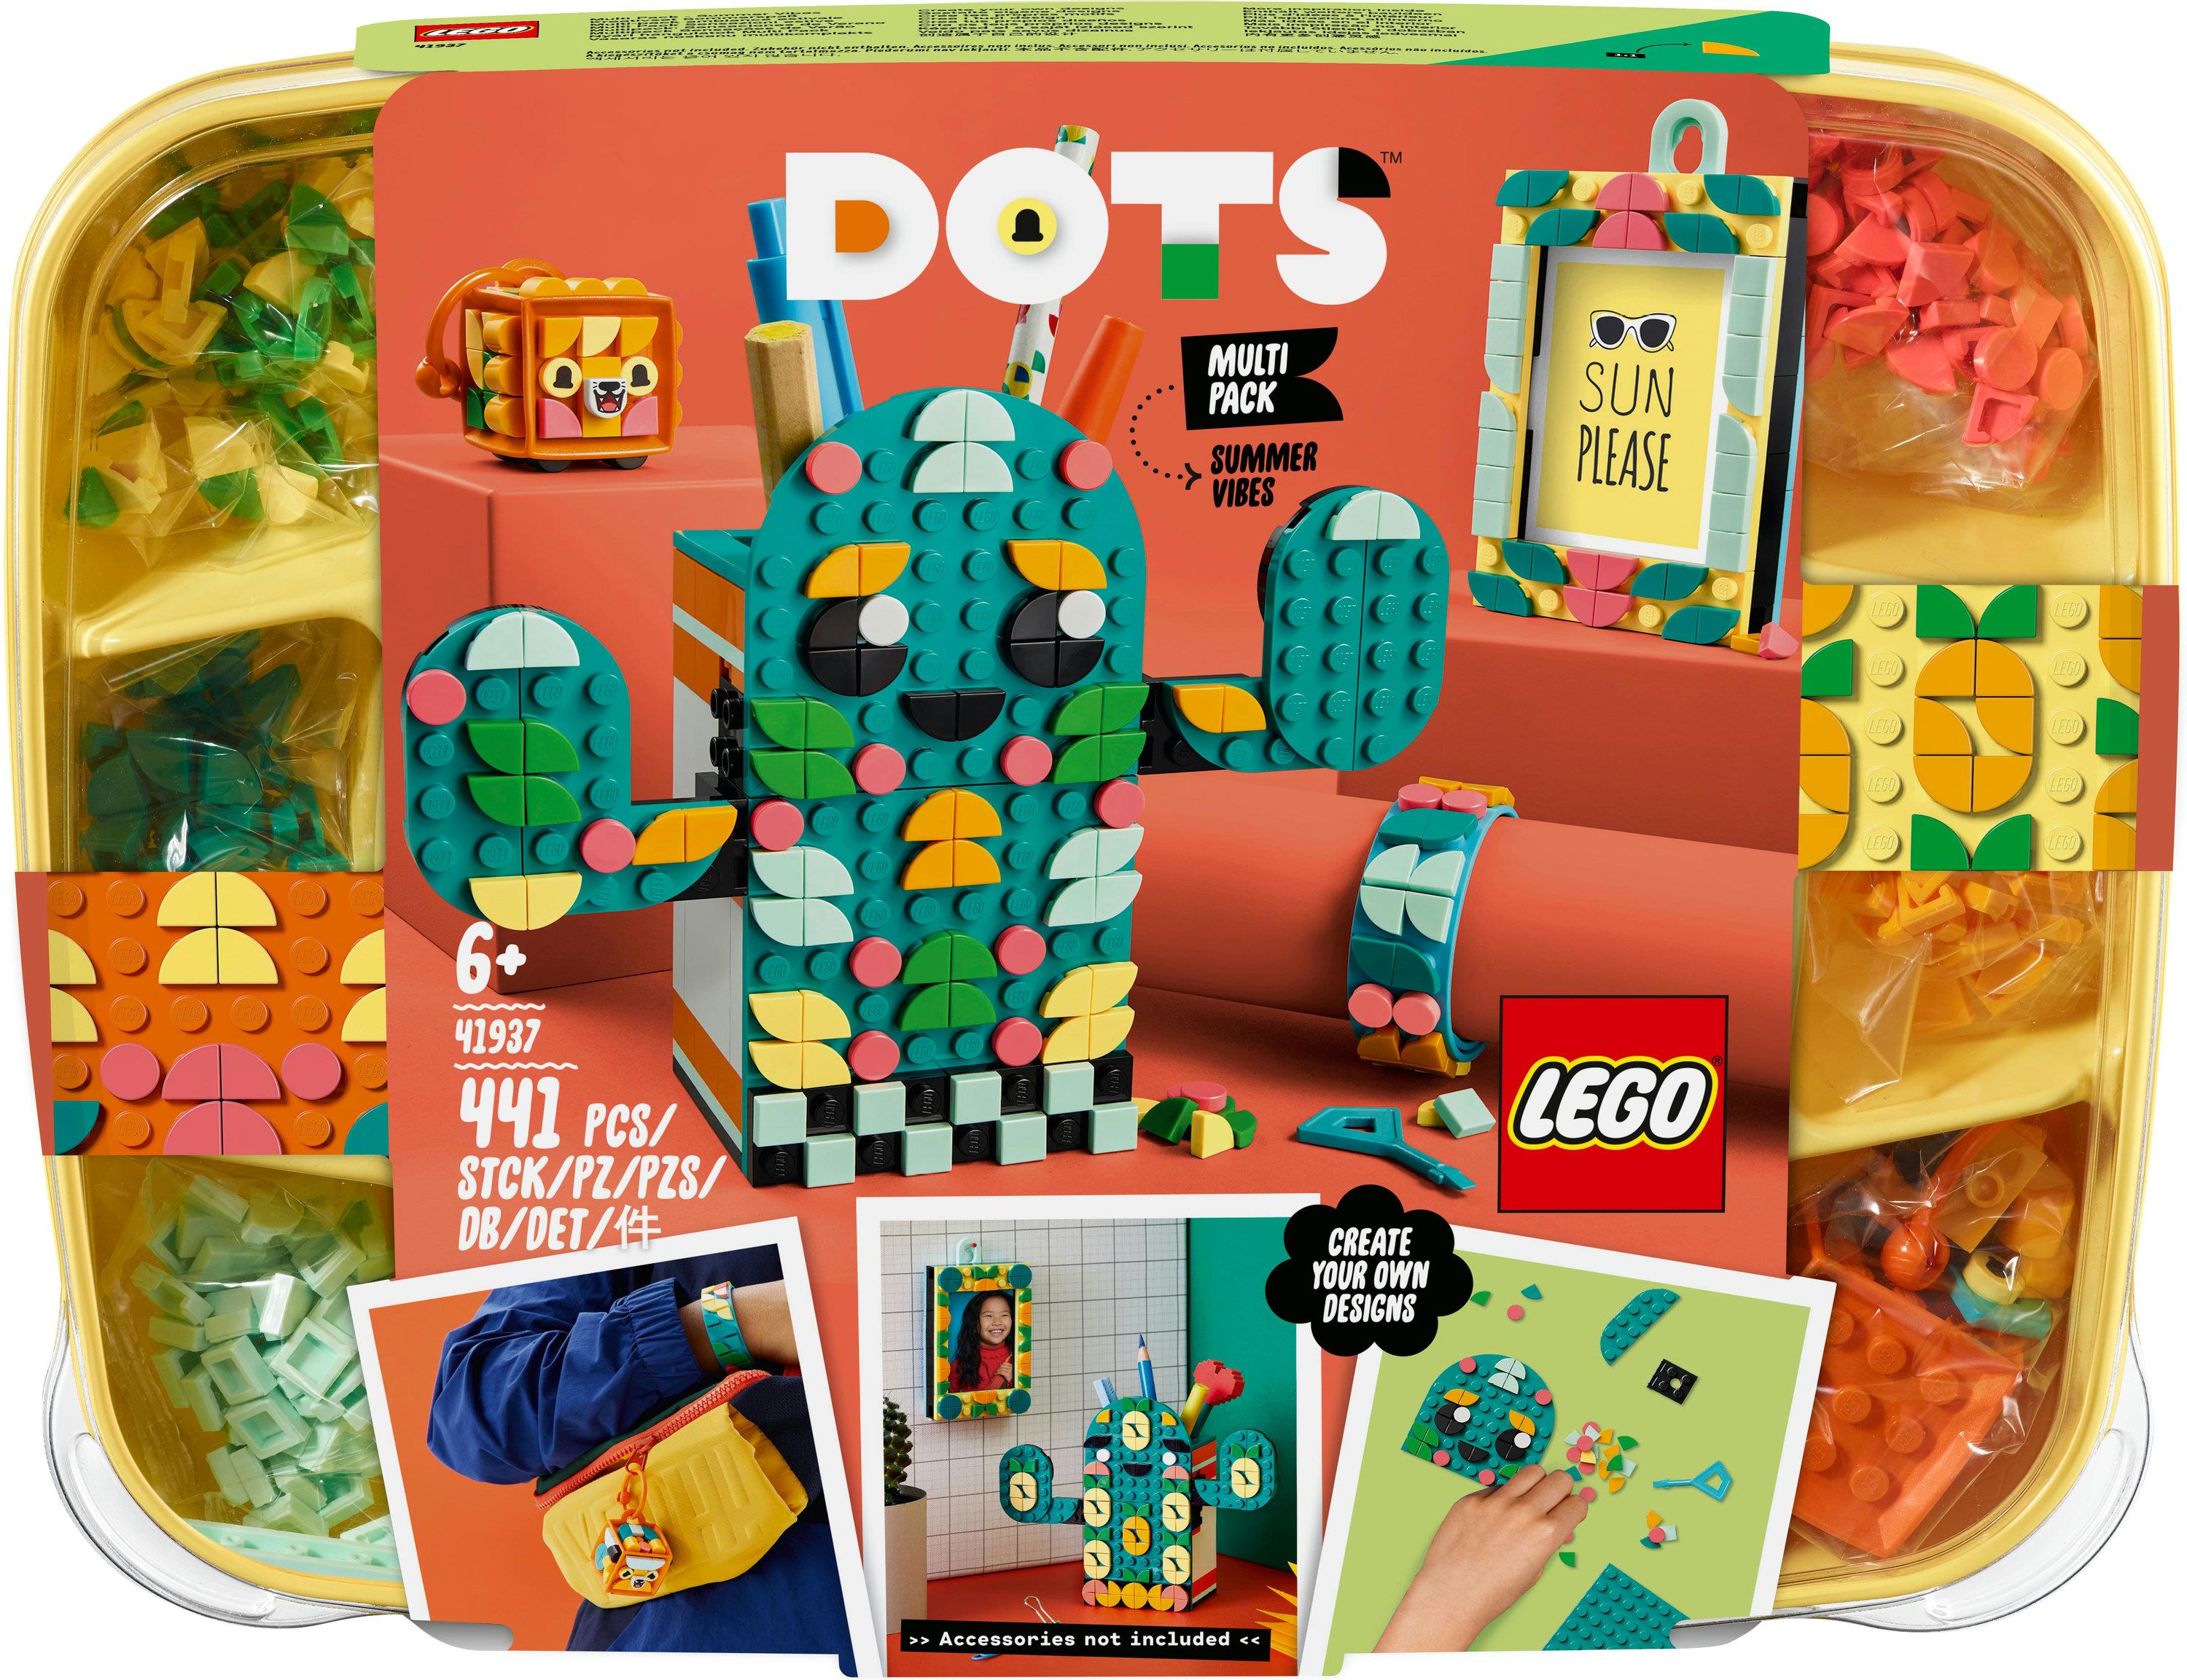 LEGO Dots Multi Pack